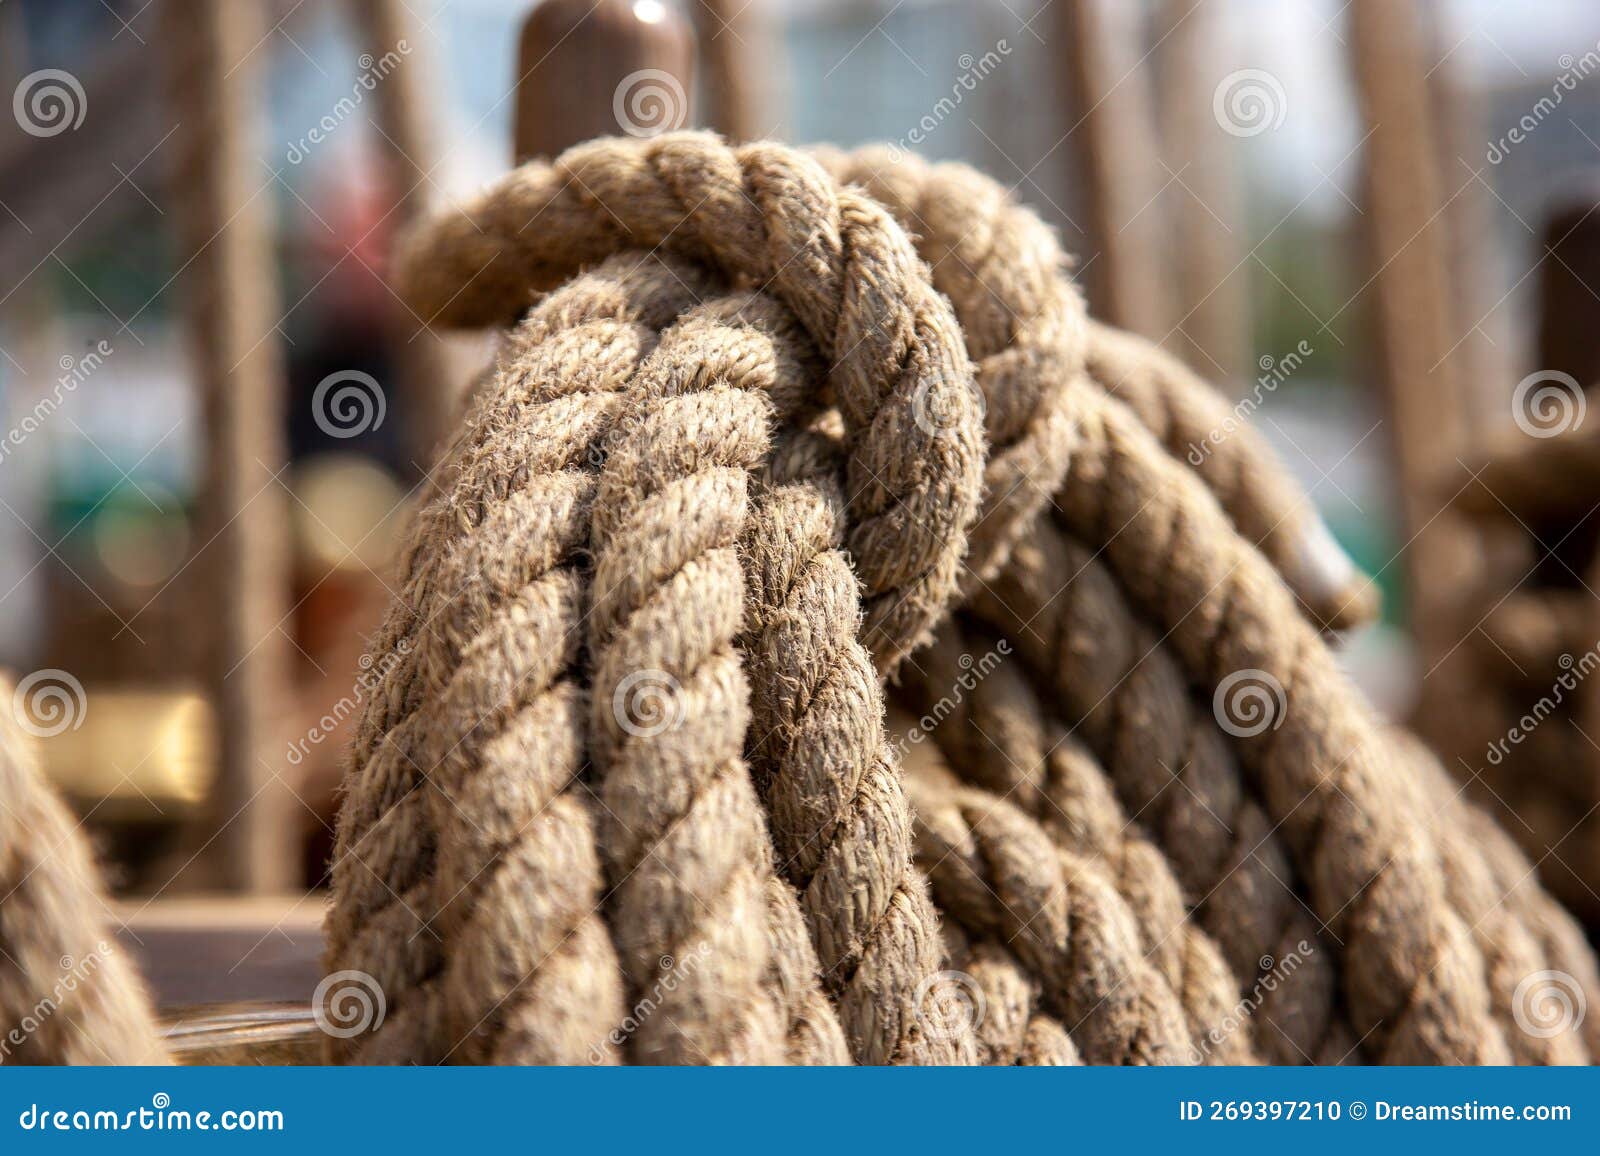 https://thumbs.dreamstime.com/z/strong-ropes-sailing-hanging-wooden-pole-strong-ropes-sailing-hanging-wooden-pole-269397210.jpg